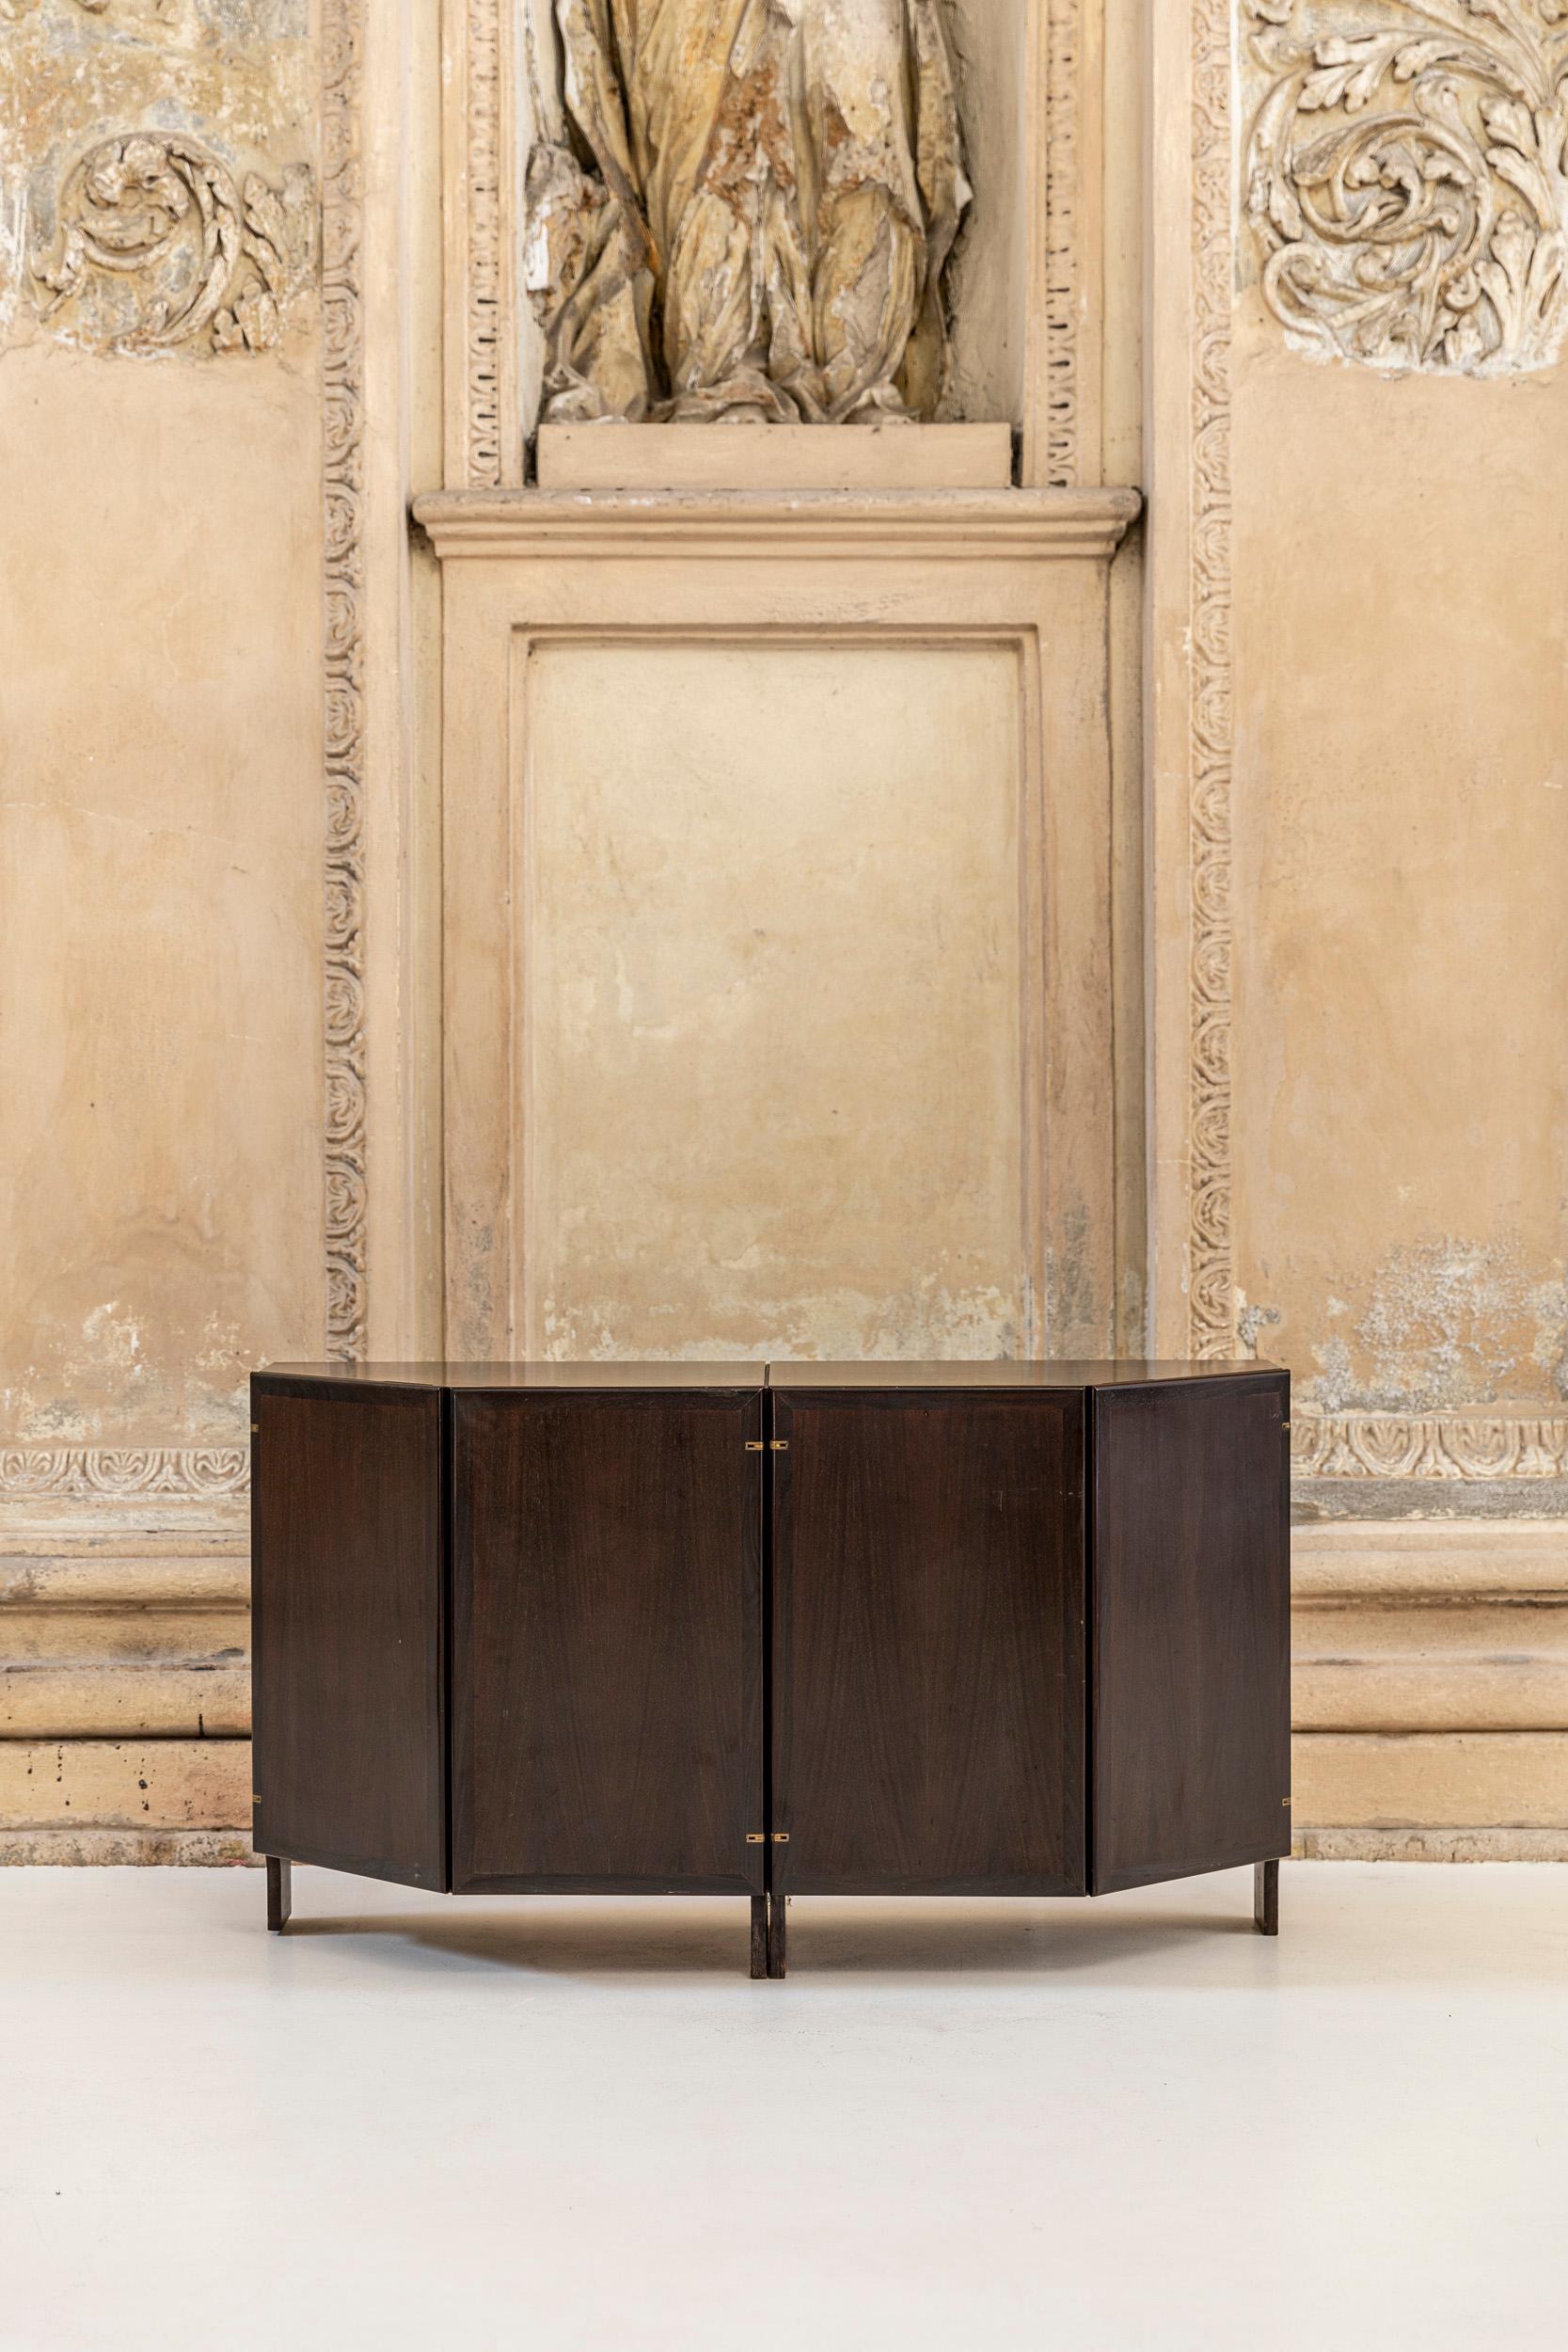 Sideboard model MB48.
Designed by Franco Albini and Franca Helg for Poggi Pavia in 1958, Italy. 
Published.